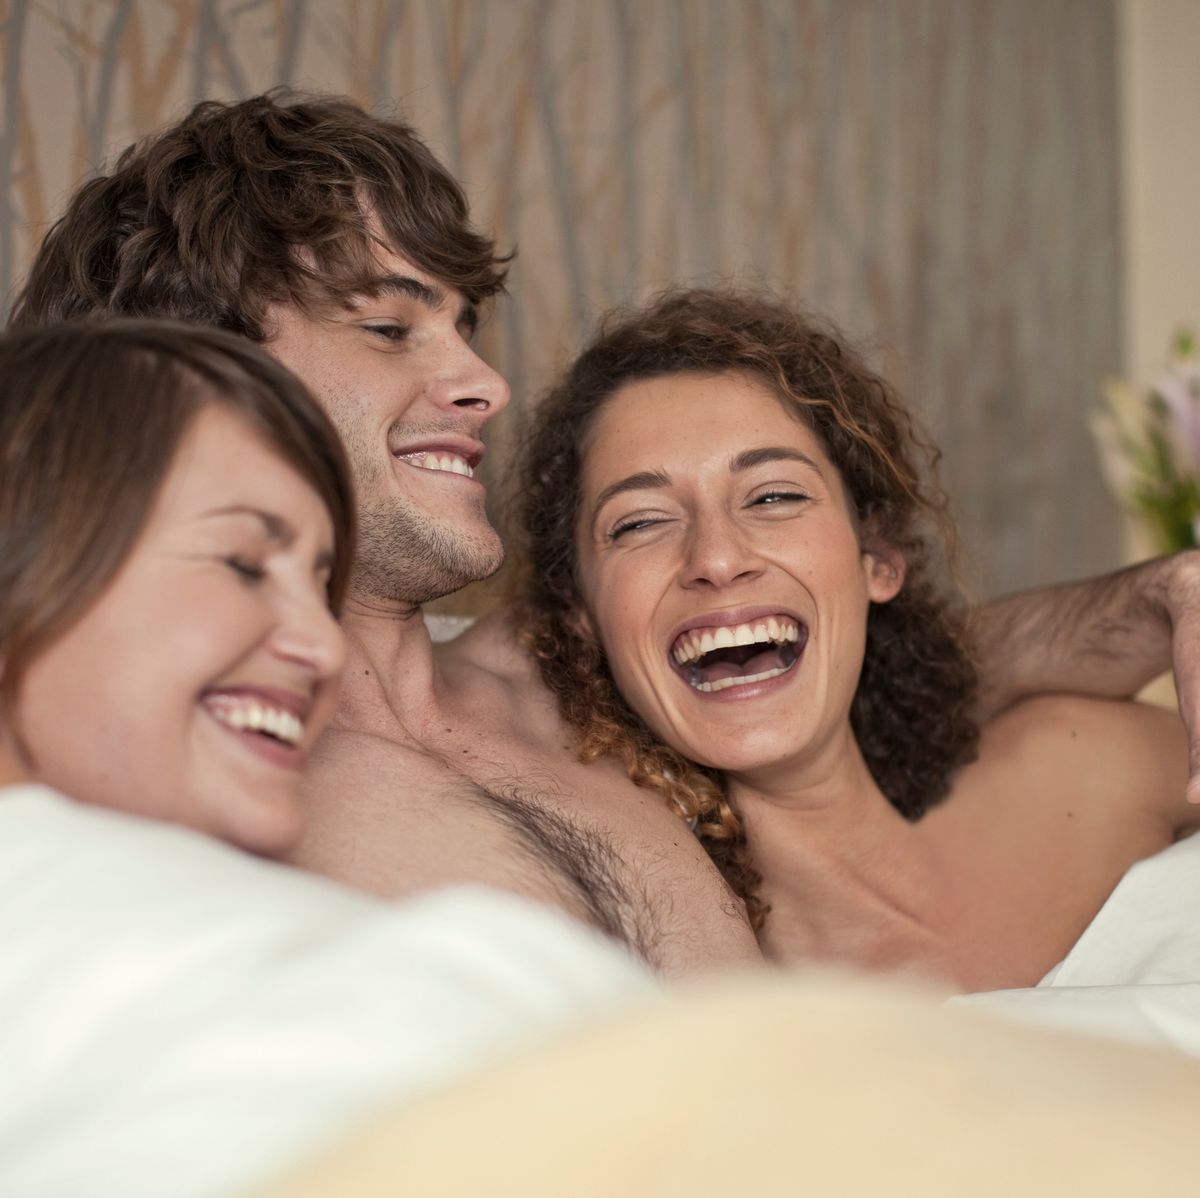 Bi Oral Threesome - 10 Threesome Sex Positions That Are Super Hot and Totally Doable